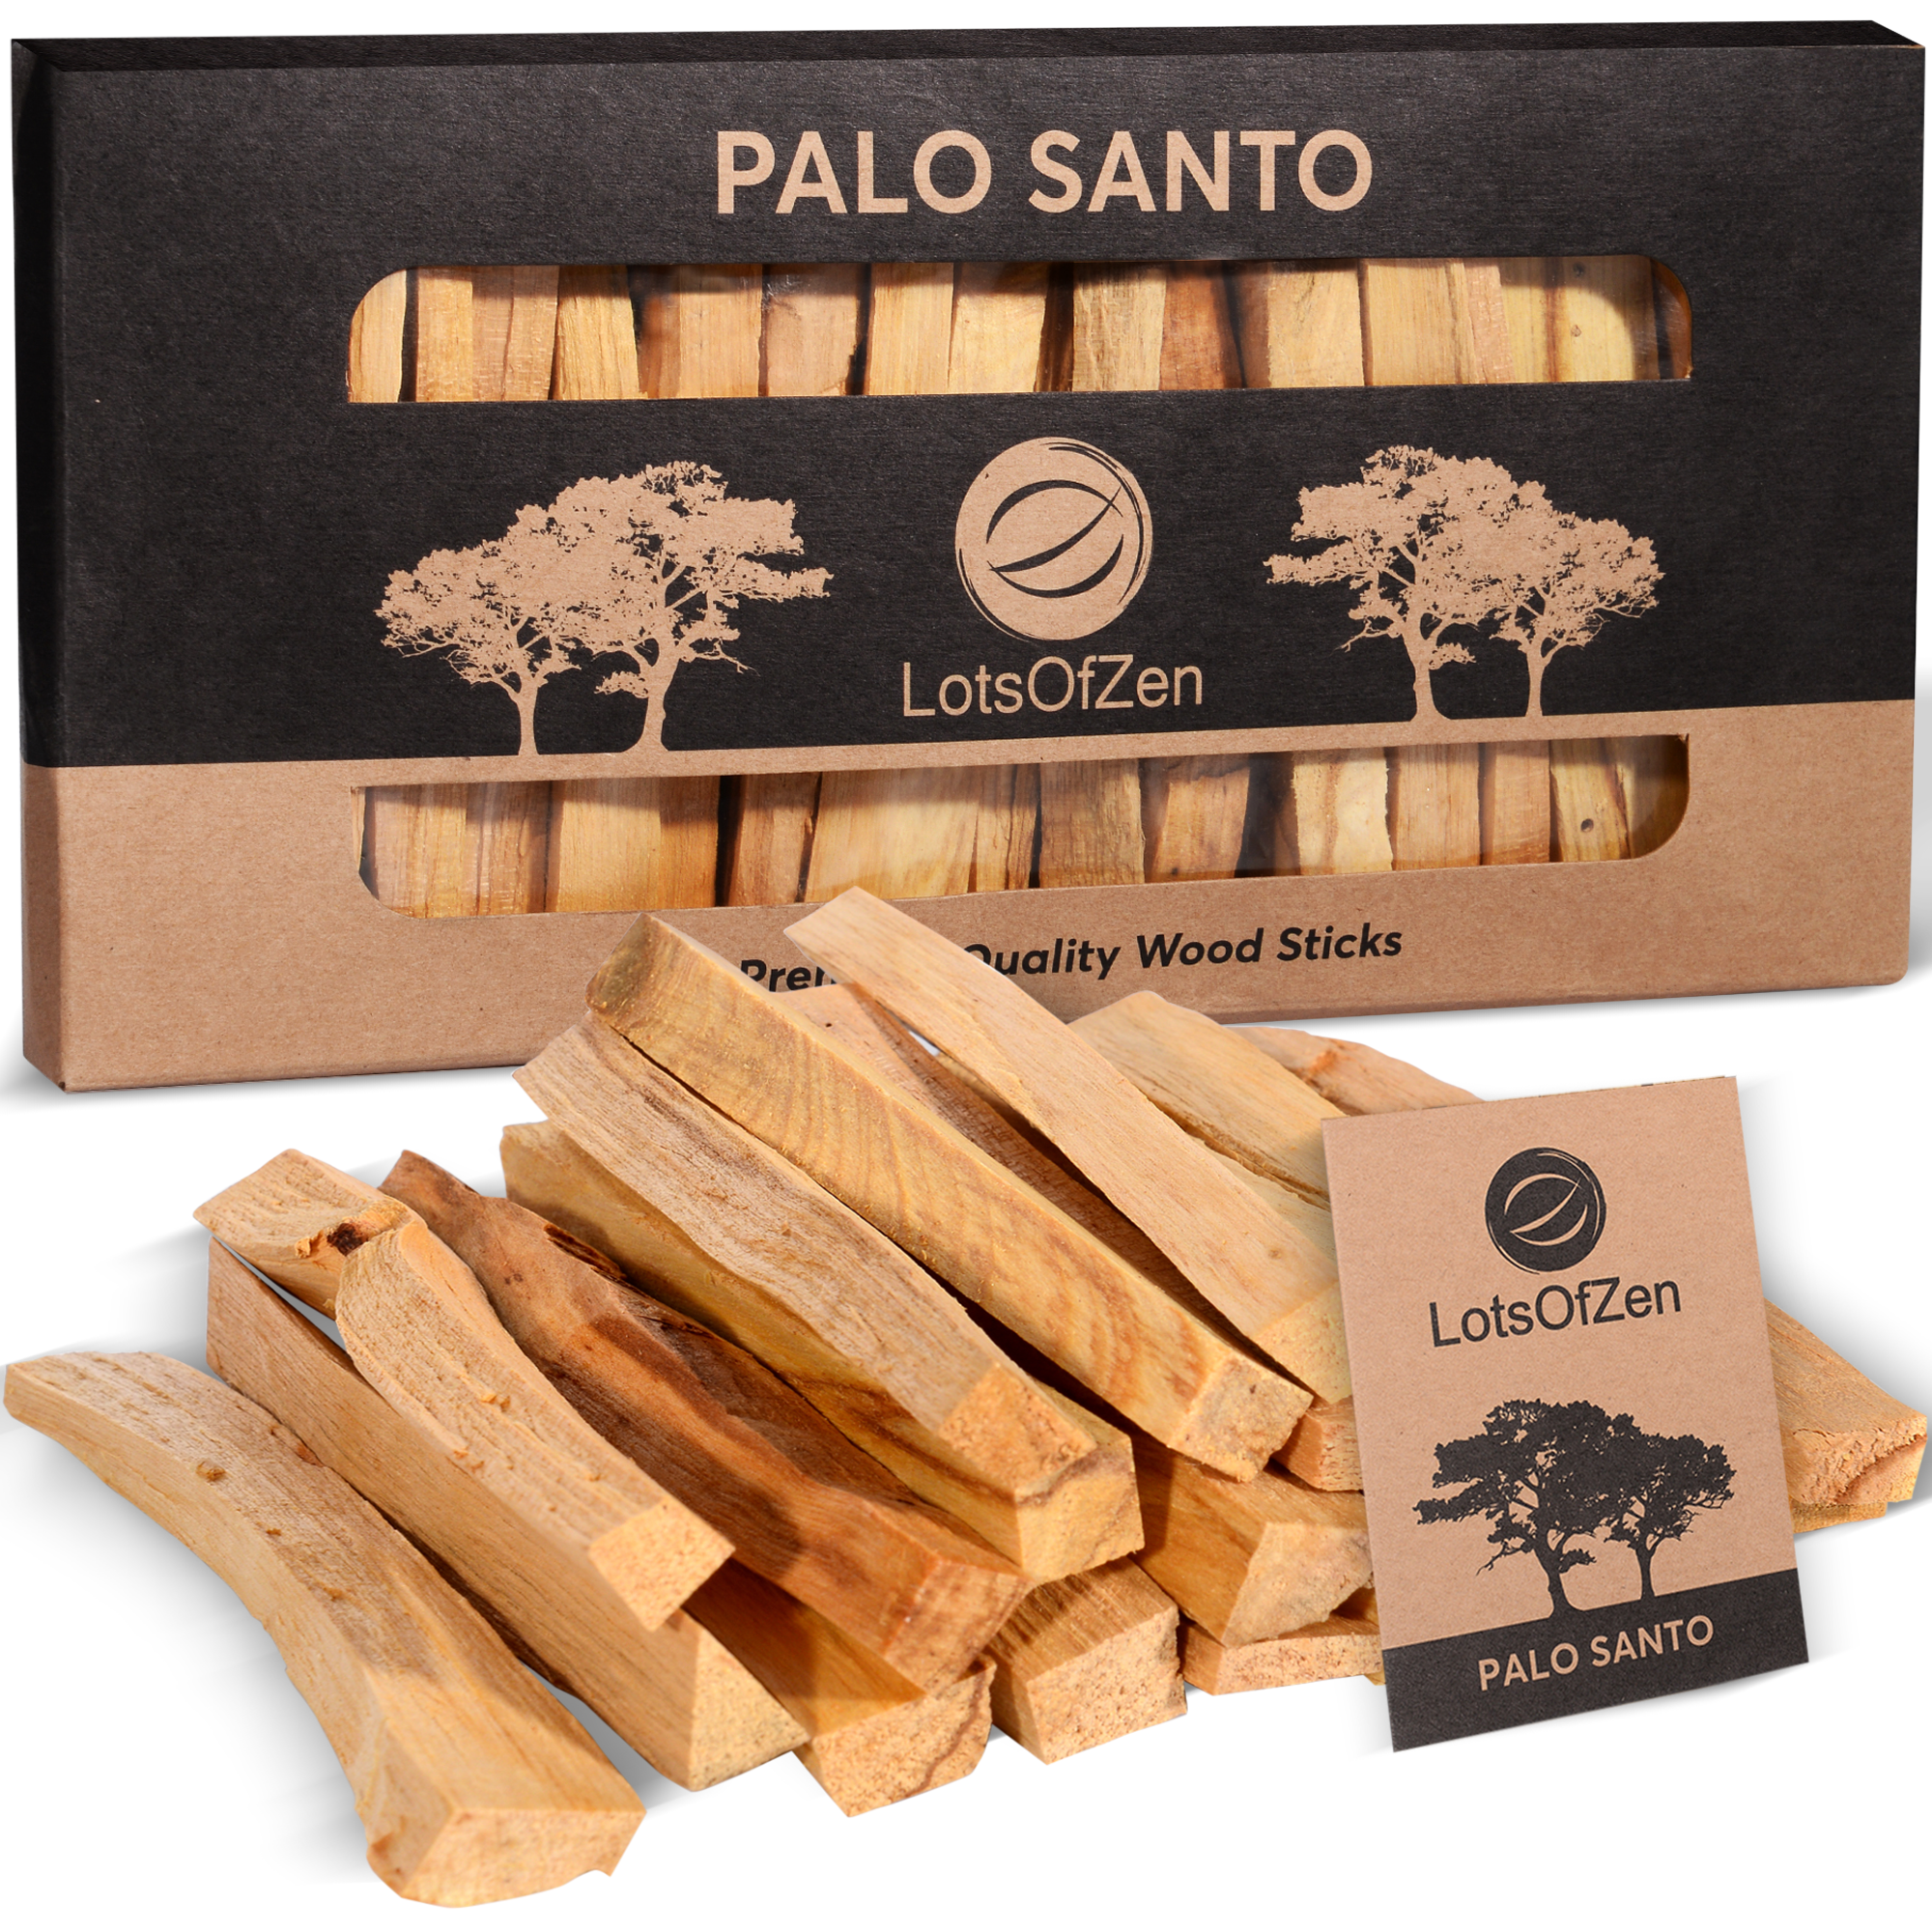 Lots of Zen Palo Santo Sticks Authentic (Approx. 160 Grams | 5.6 oz) Large Pack 100% Natural Spiritual Cleansing Palo Santo Smudge Sticks from Peru